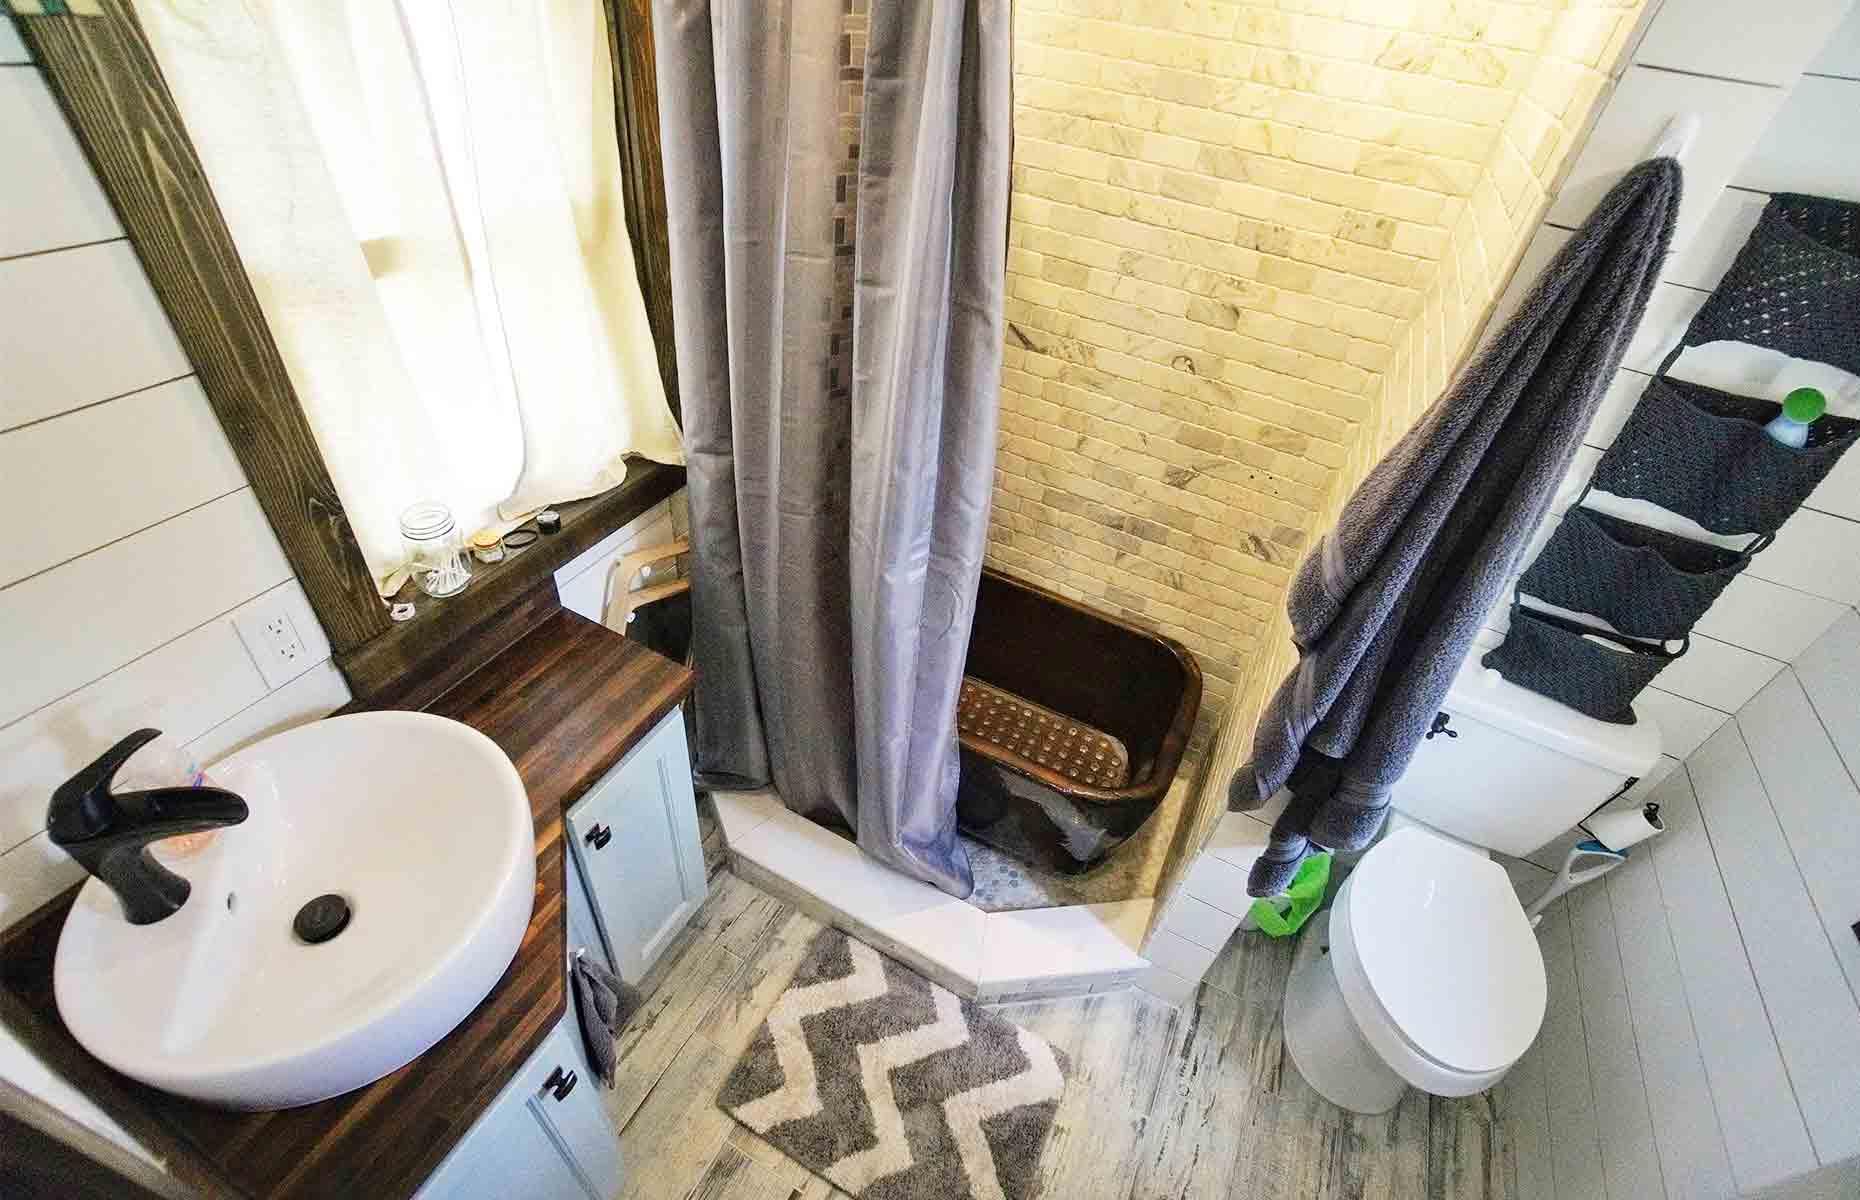 <p>Situated at the rear of the tiny house, what the bathroom lacks in size, it more than makes up for in style. Lined with tumbled Italian marble tiles, the walk-in rainfall shower takes centre stage, while nifty design details like the corner vanity make the best use of the available space. </p>